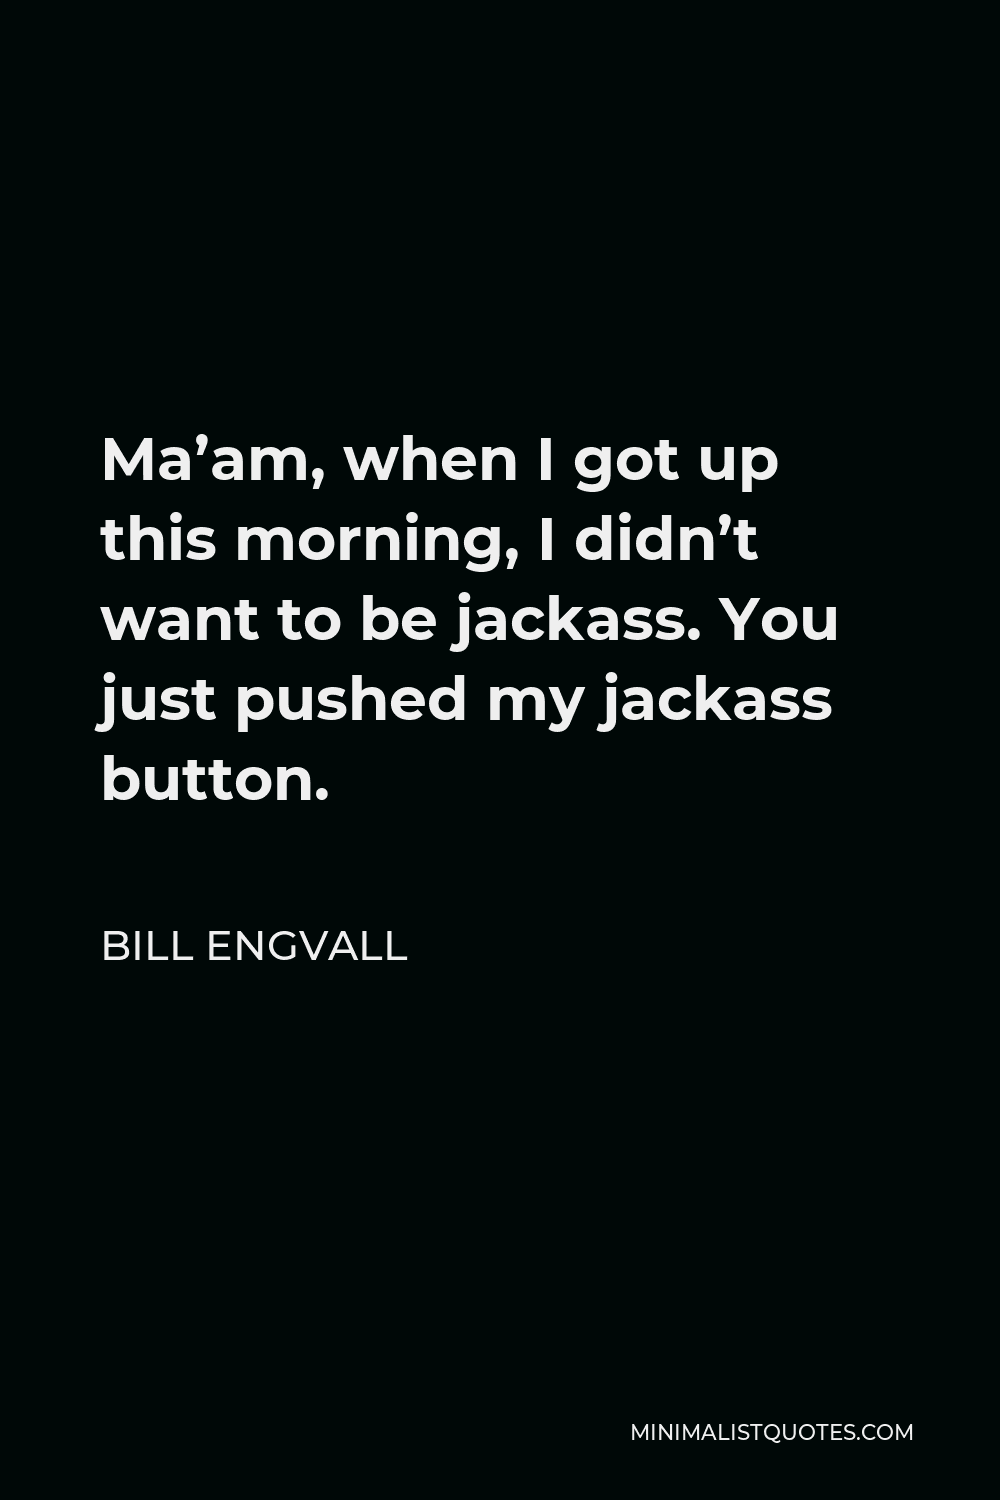 Bill Engvall Quote - Ma’am, when I got up this morning, I didn’t want to be jackass. You just pushed my jackass button.